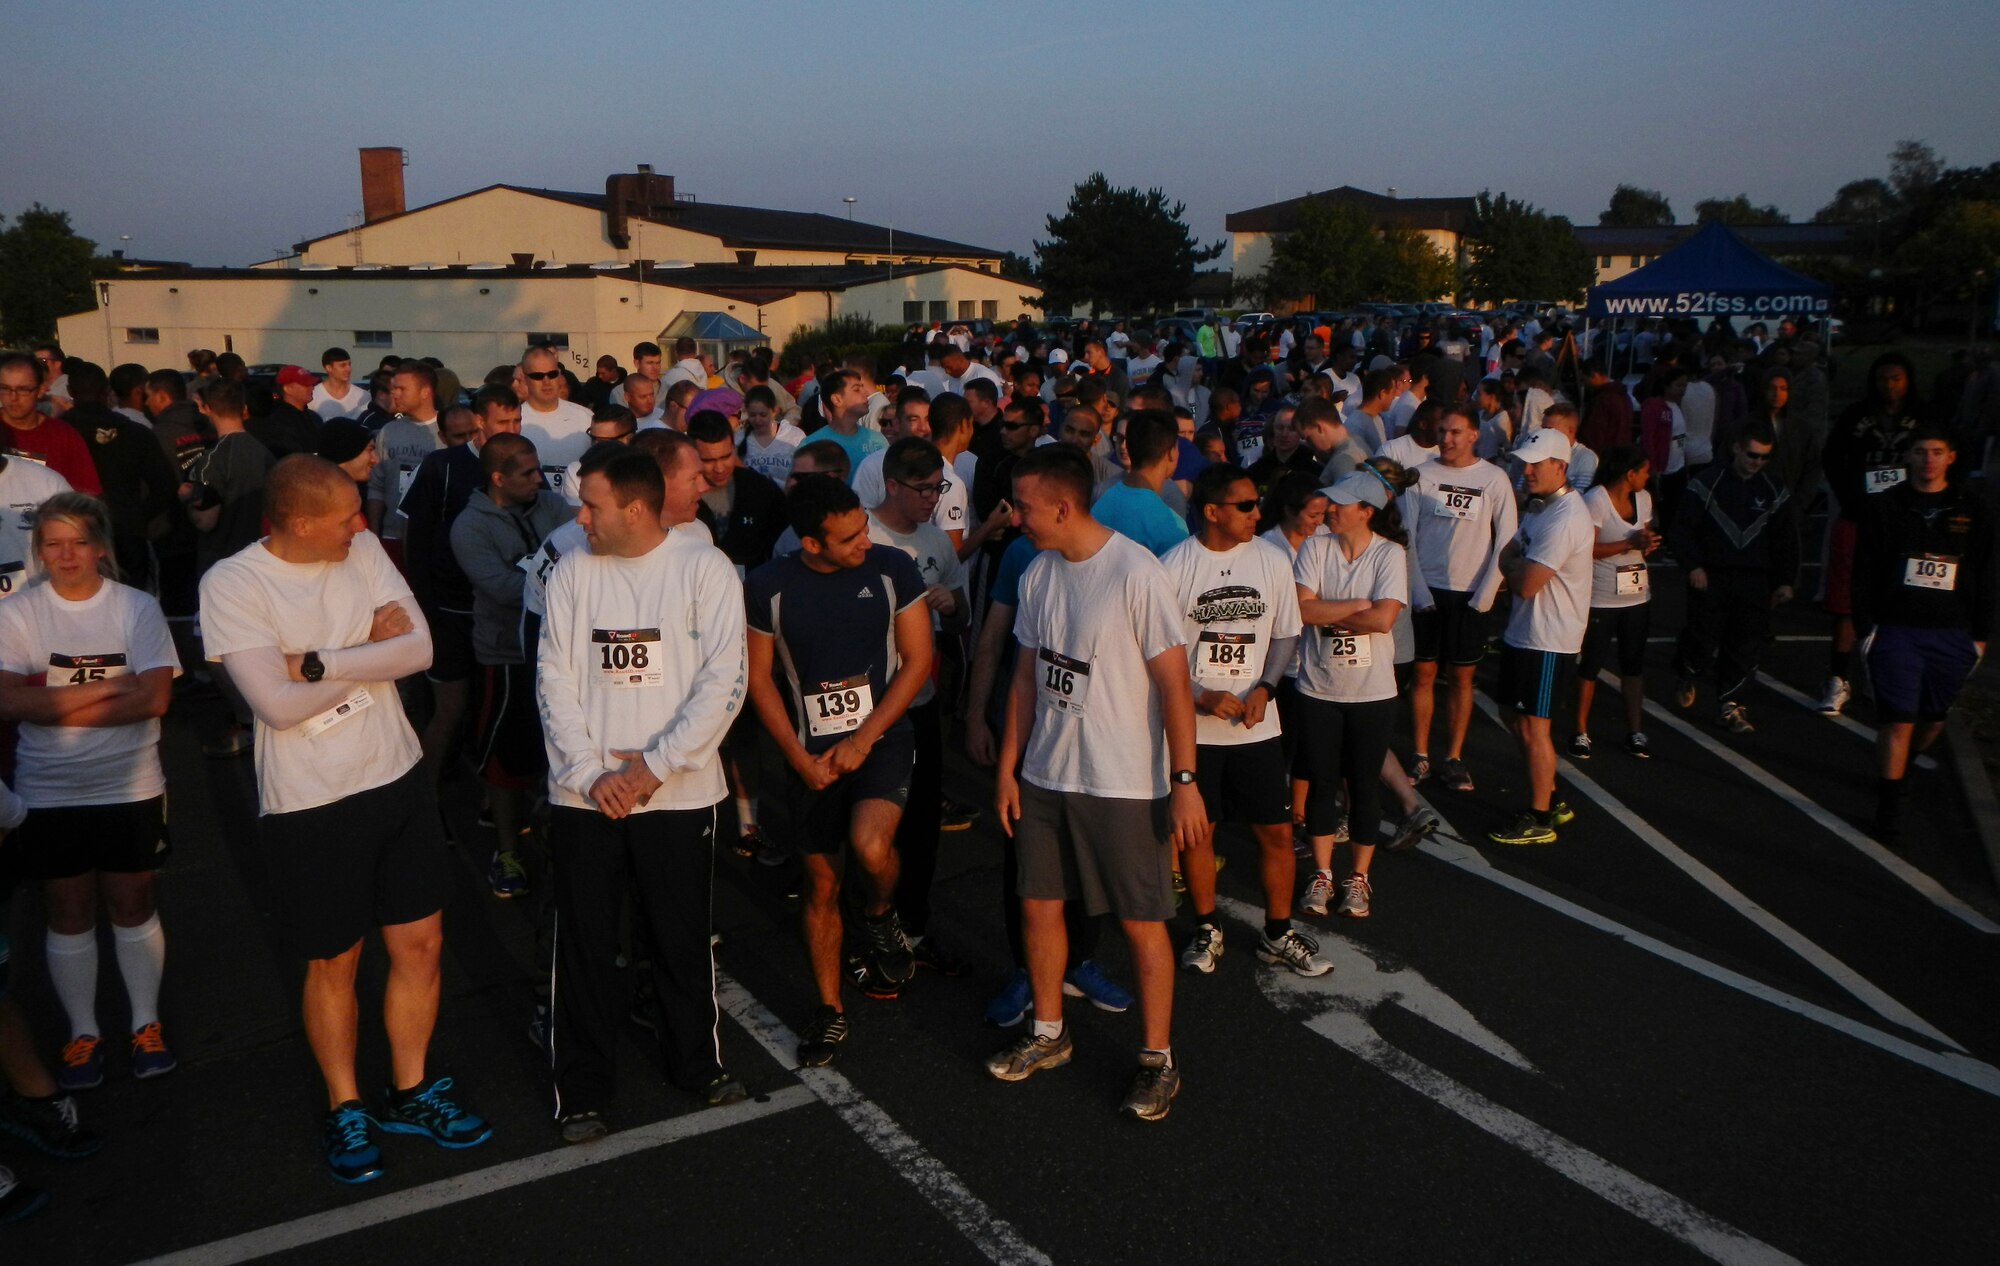 Color Run participants line up to begin the Diversity Day 5K Color Run Aug. 21, 2014, at Spangdahlem Air Base, Germany. The Color Run kicked off the first of many events to celebrate Diversity Day. (U.S. Air Force photo by Staff Sgt. Christopher Ruano/Released)